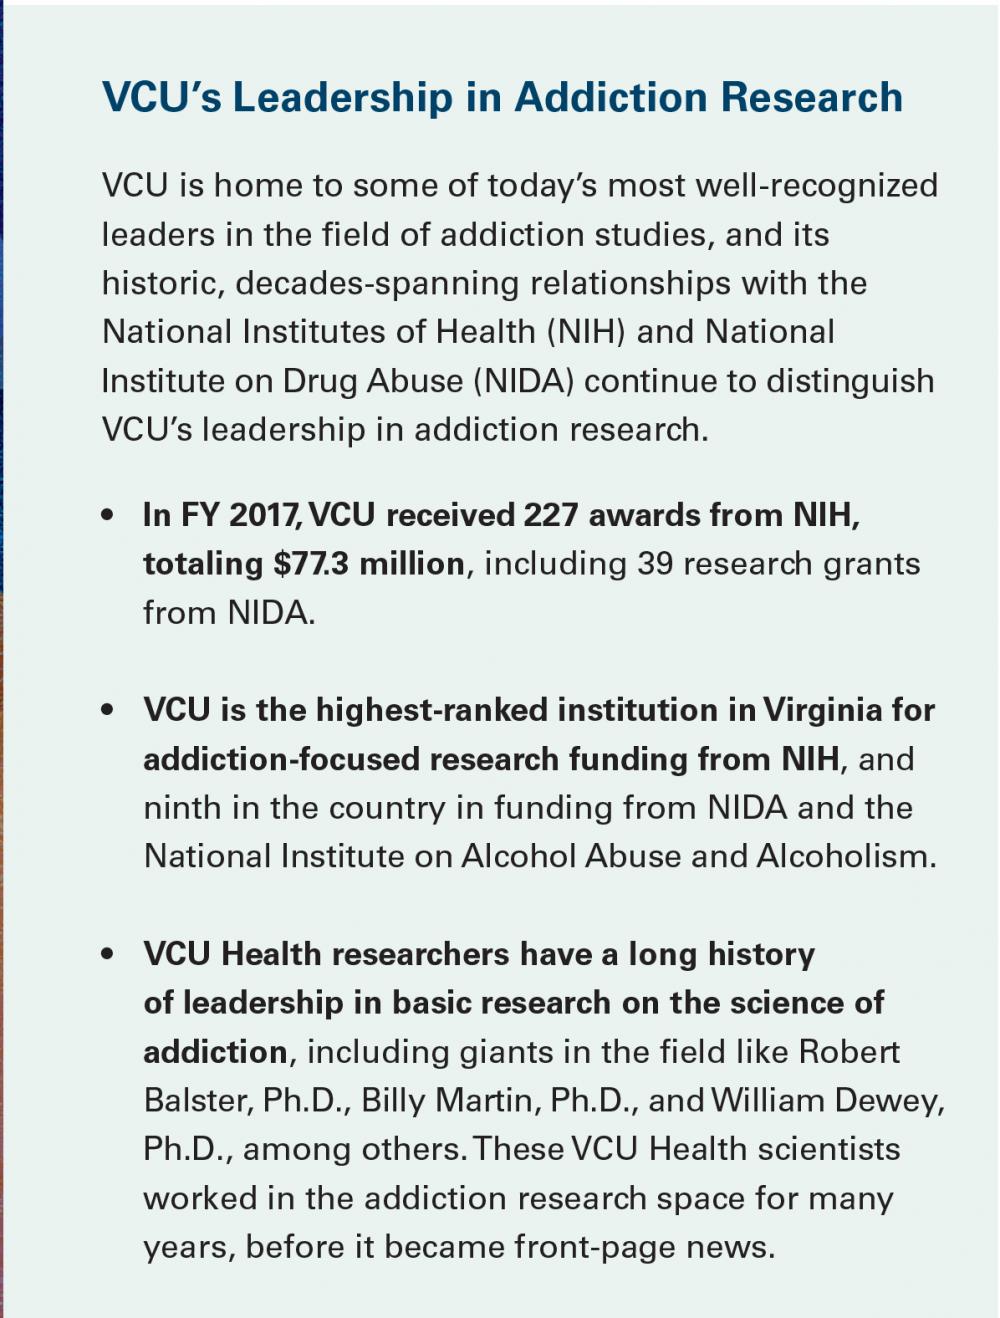 Infographic on VCU's leadership in addiction research